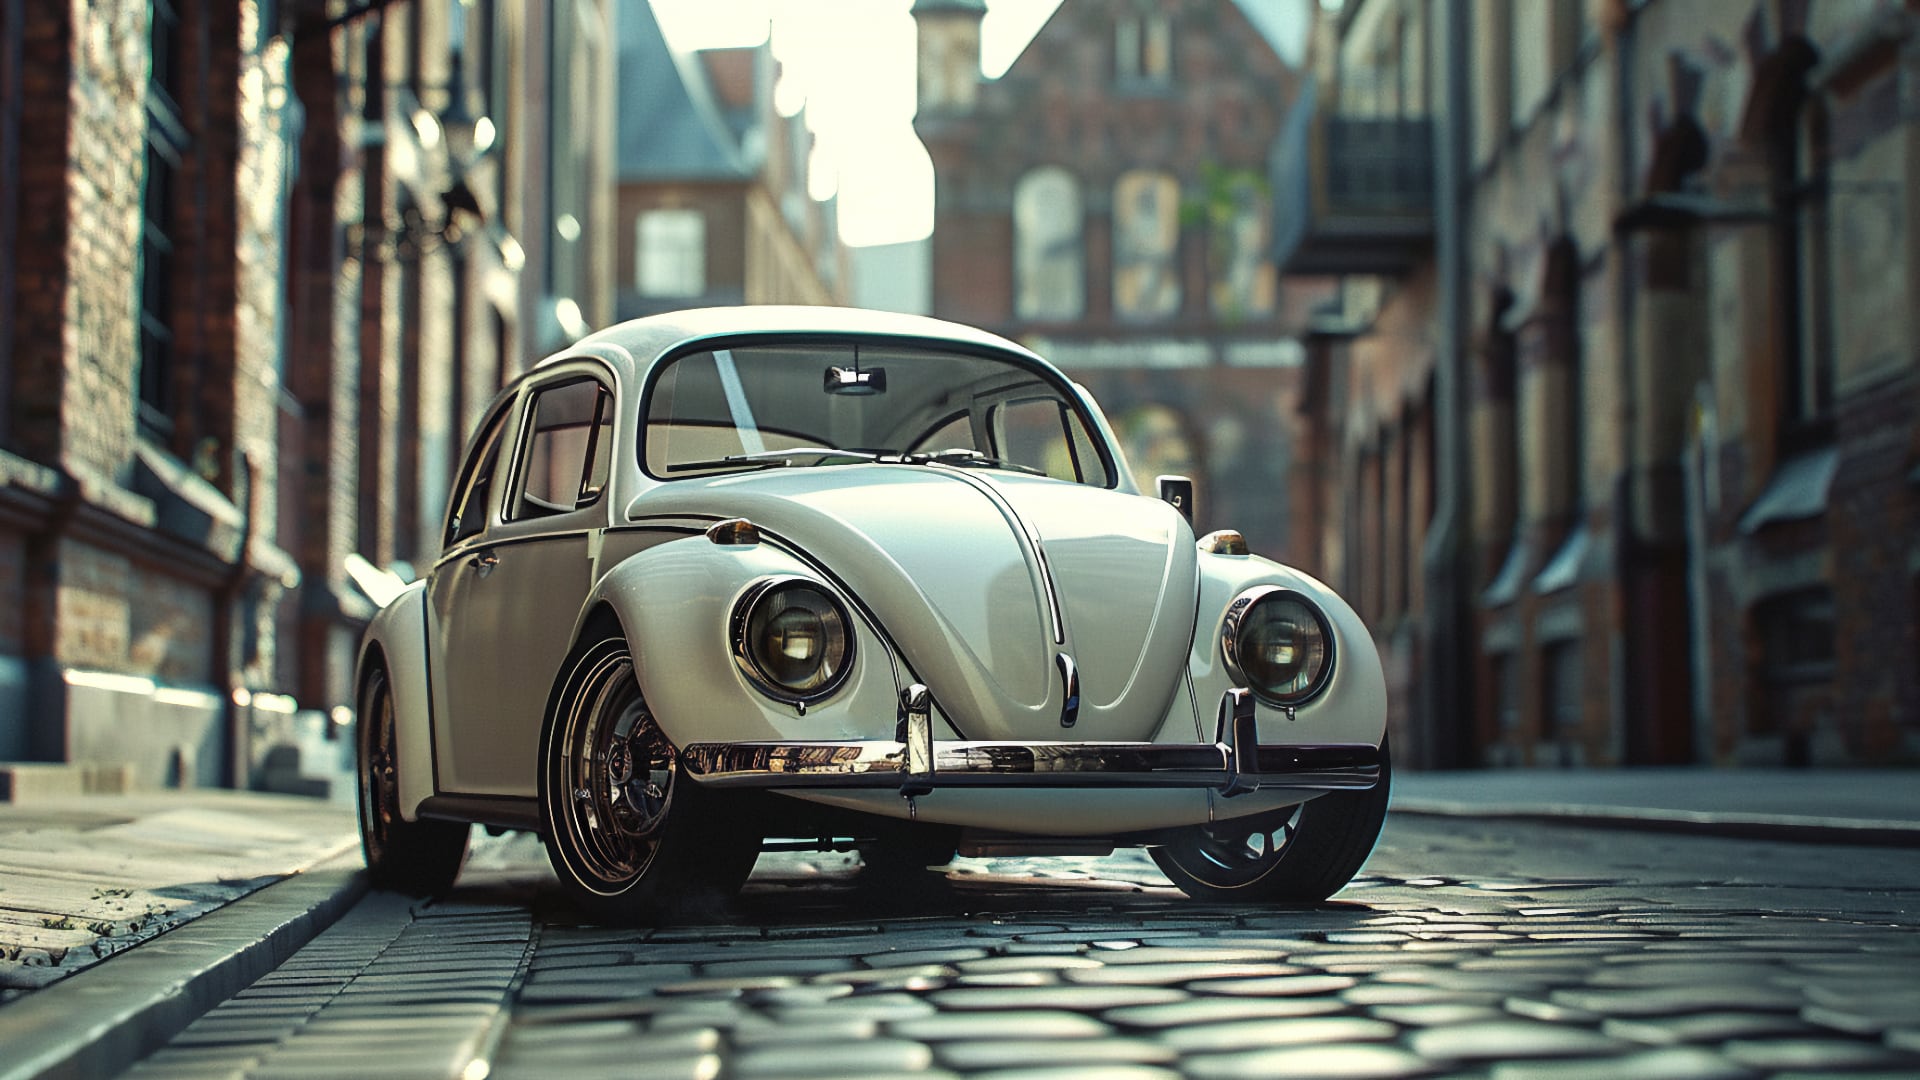 A white Volkswagen Beetle, from one of the years to avoid, is parked on a cobblestone street.